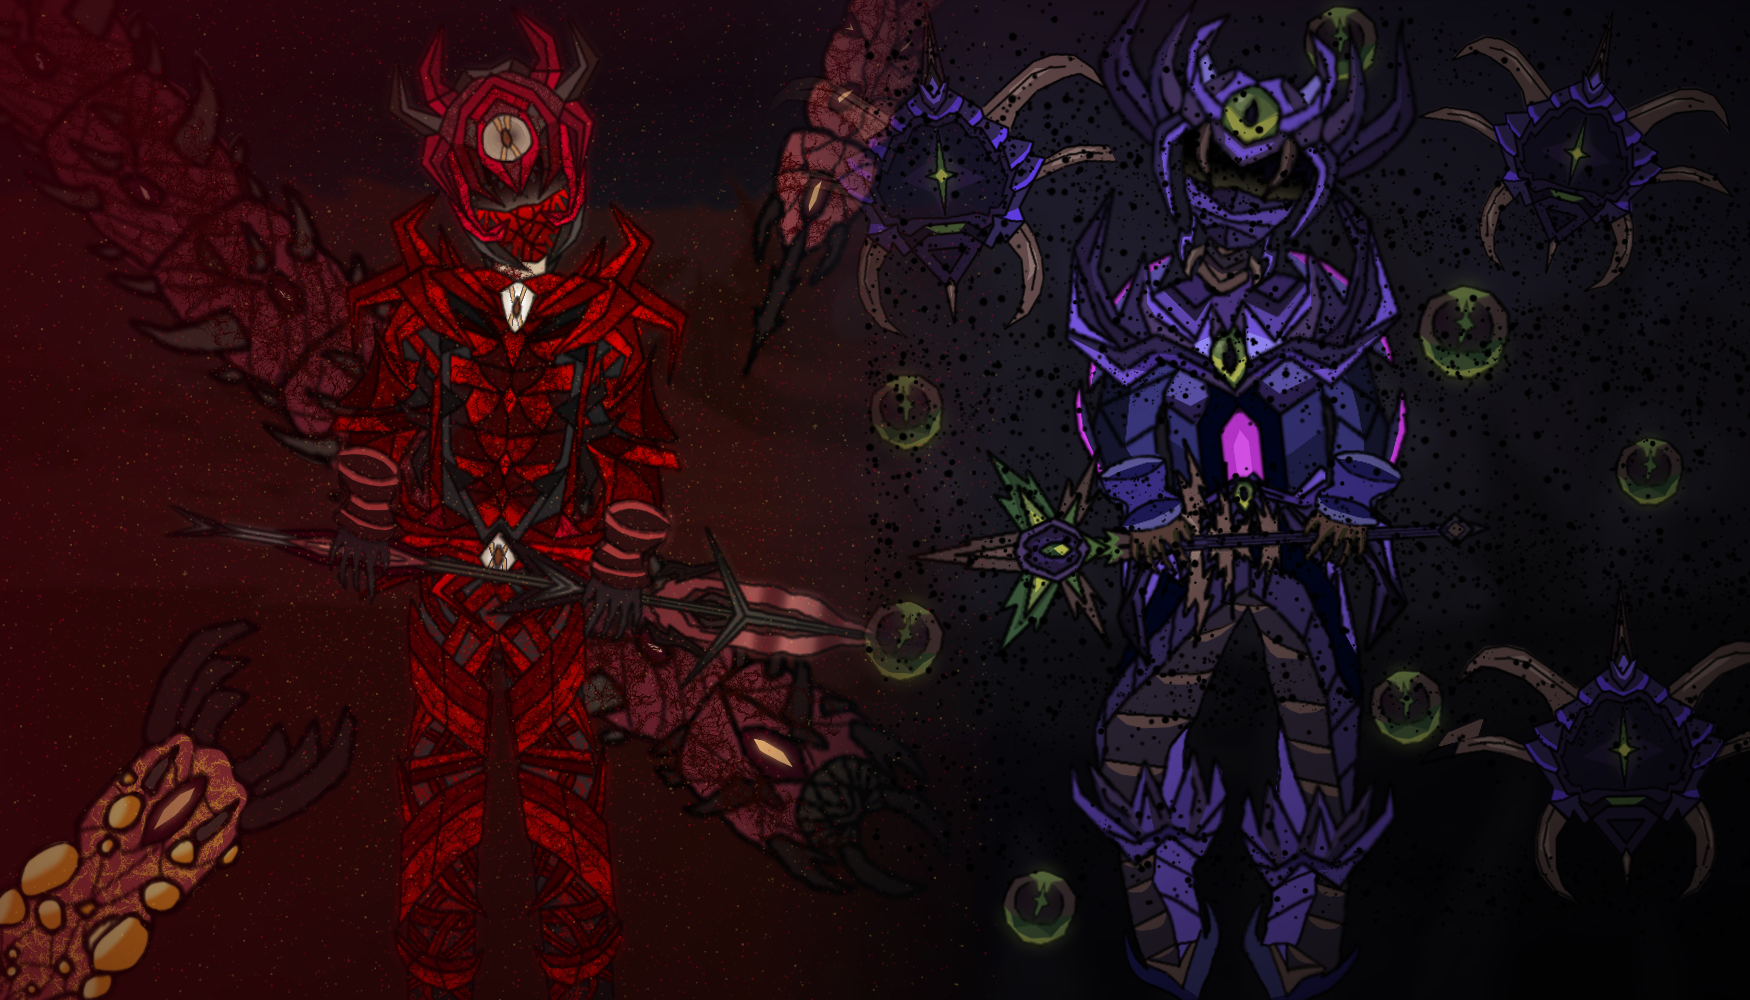 Crimson Corruption Wallpaper I Made By Combining 2 Of My Drawings Together. Based Off Of The Hive Mind And The Perforators From Calamity Mod